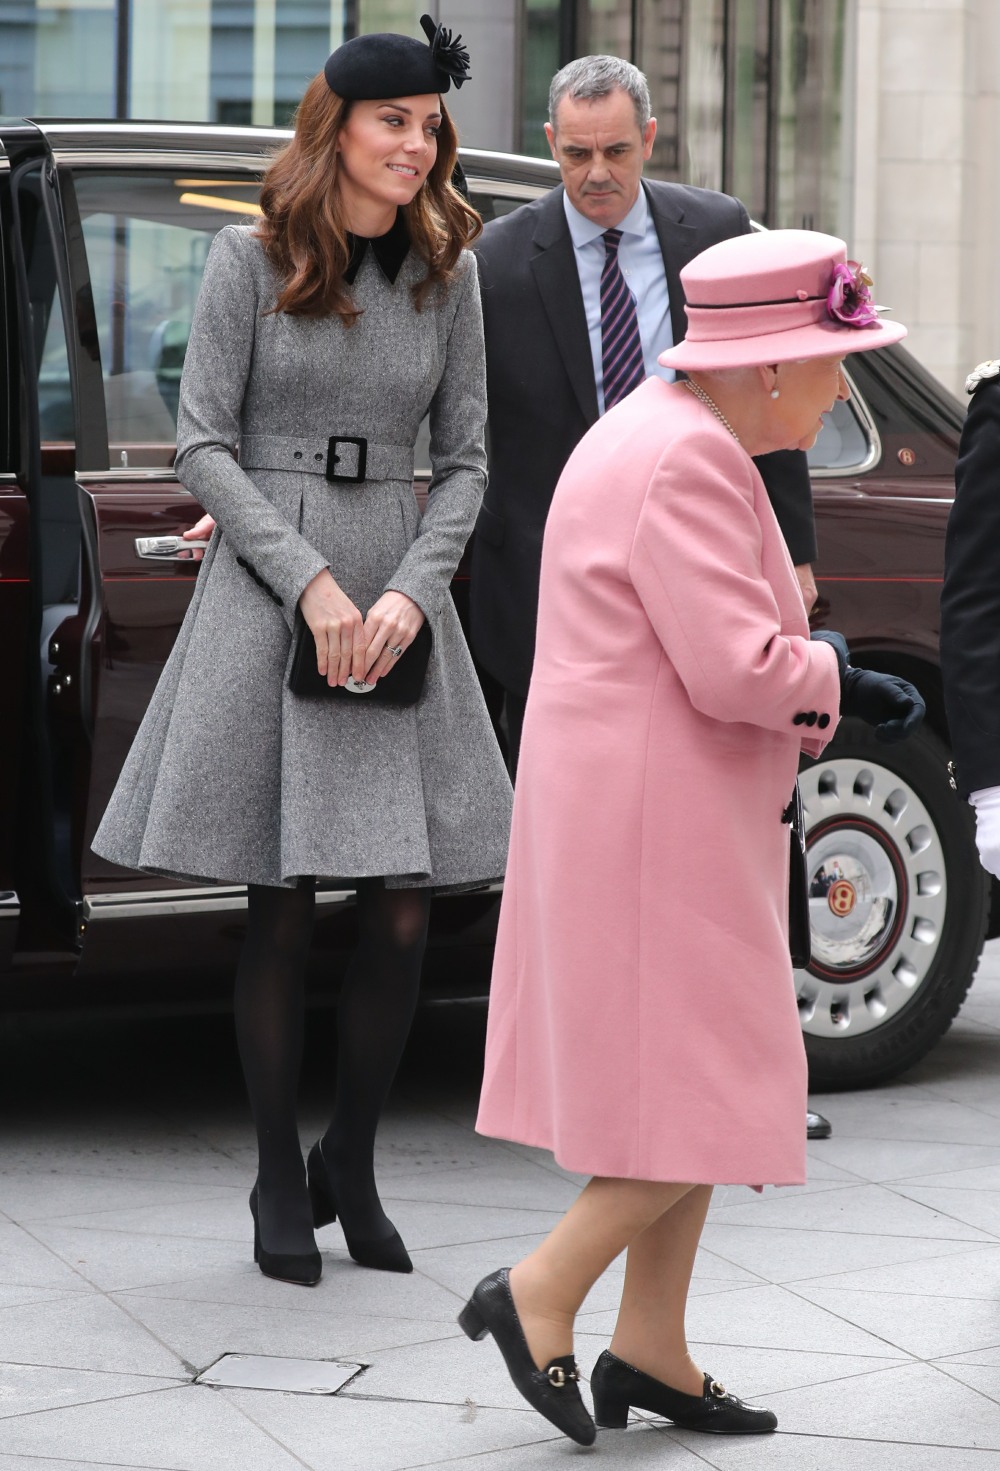 The Queen accompanied by Catherine, Duchess of Cambridge visit King’s College London